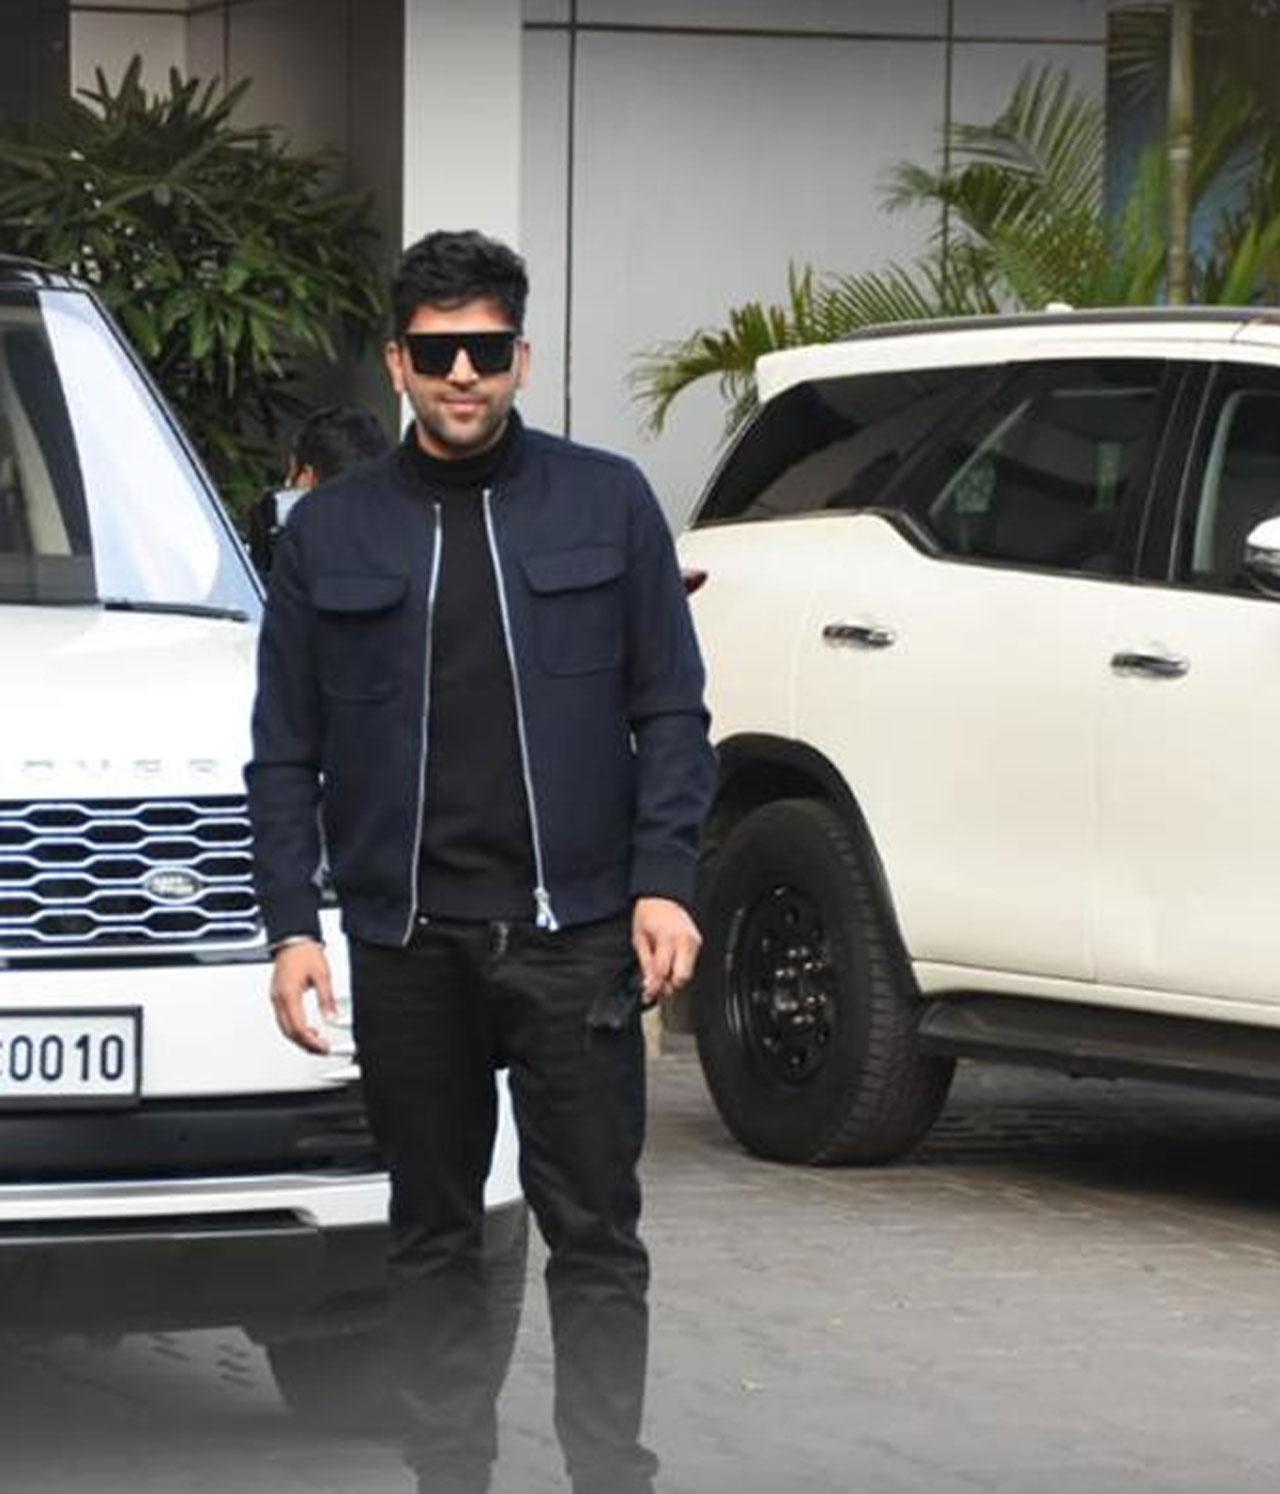 Also spotted at the airport was composer Guru Randhawa. He also aced his airport look.